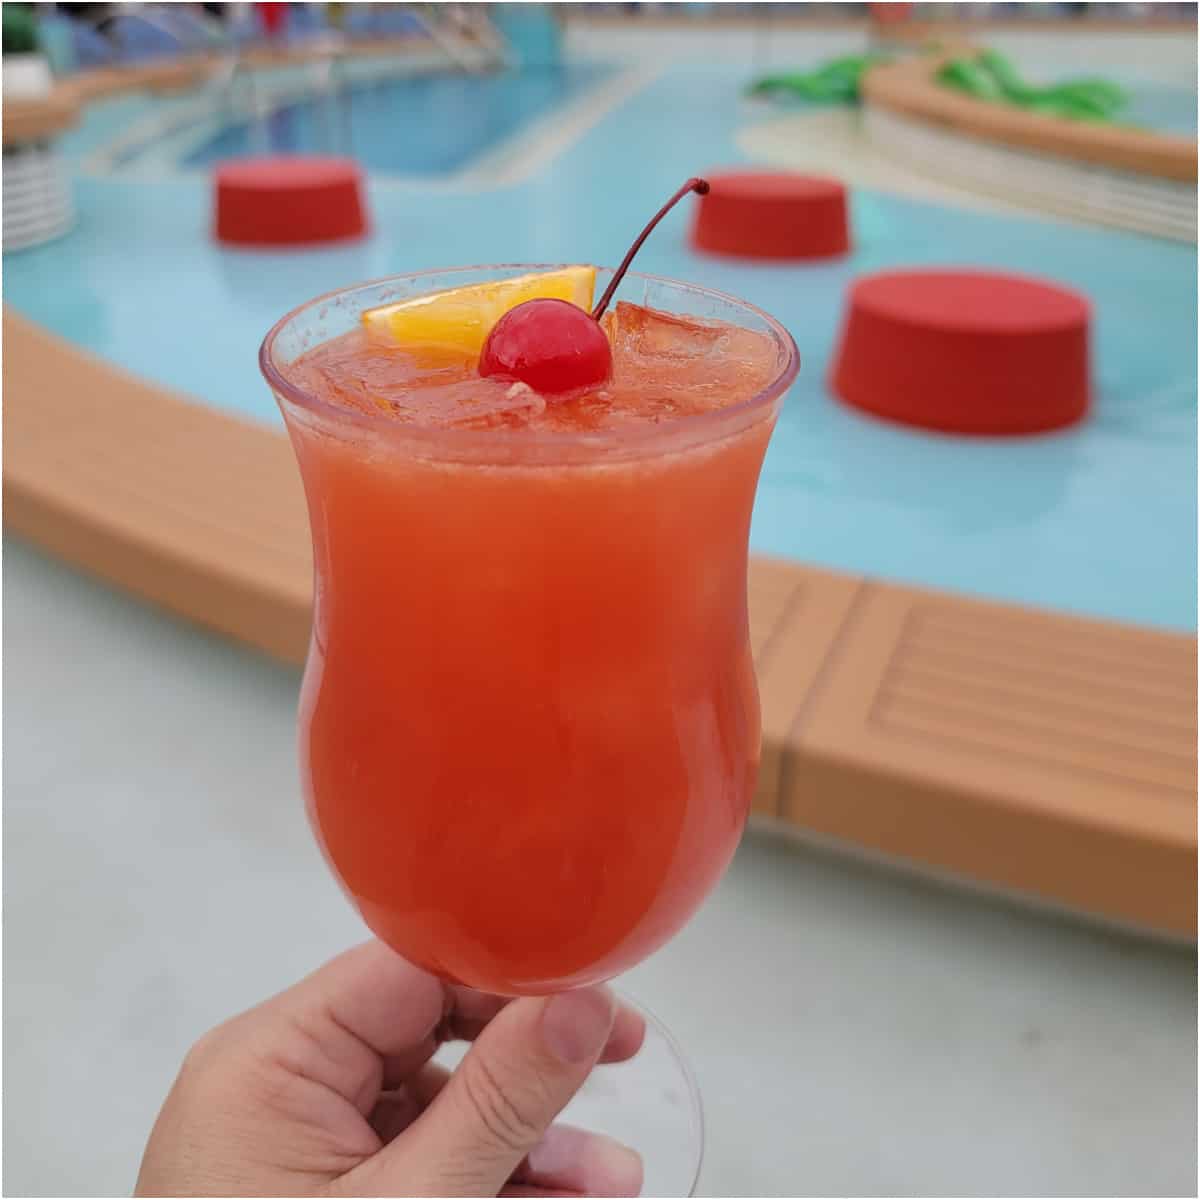 Red tropical cocktail being held near a pool